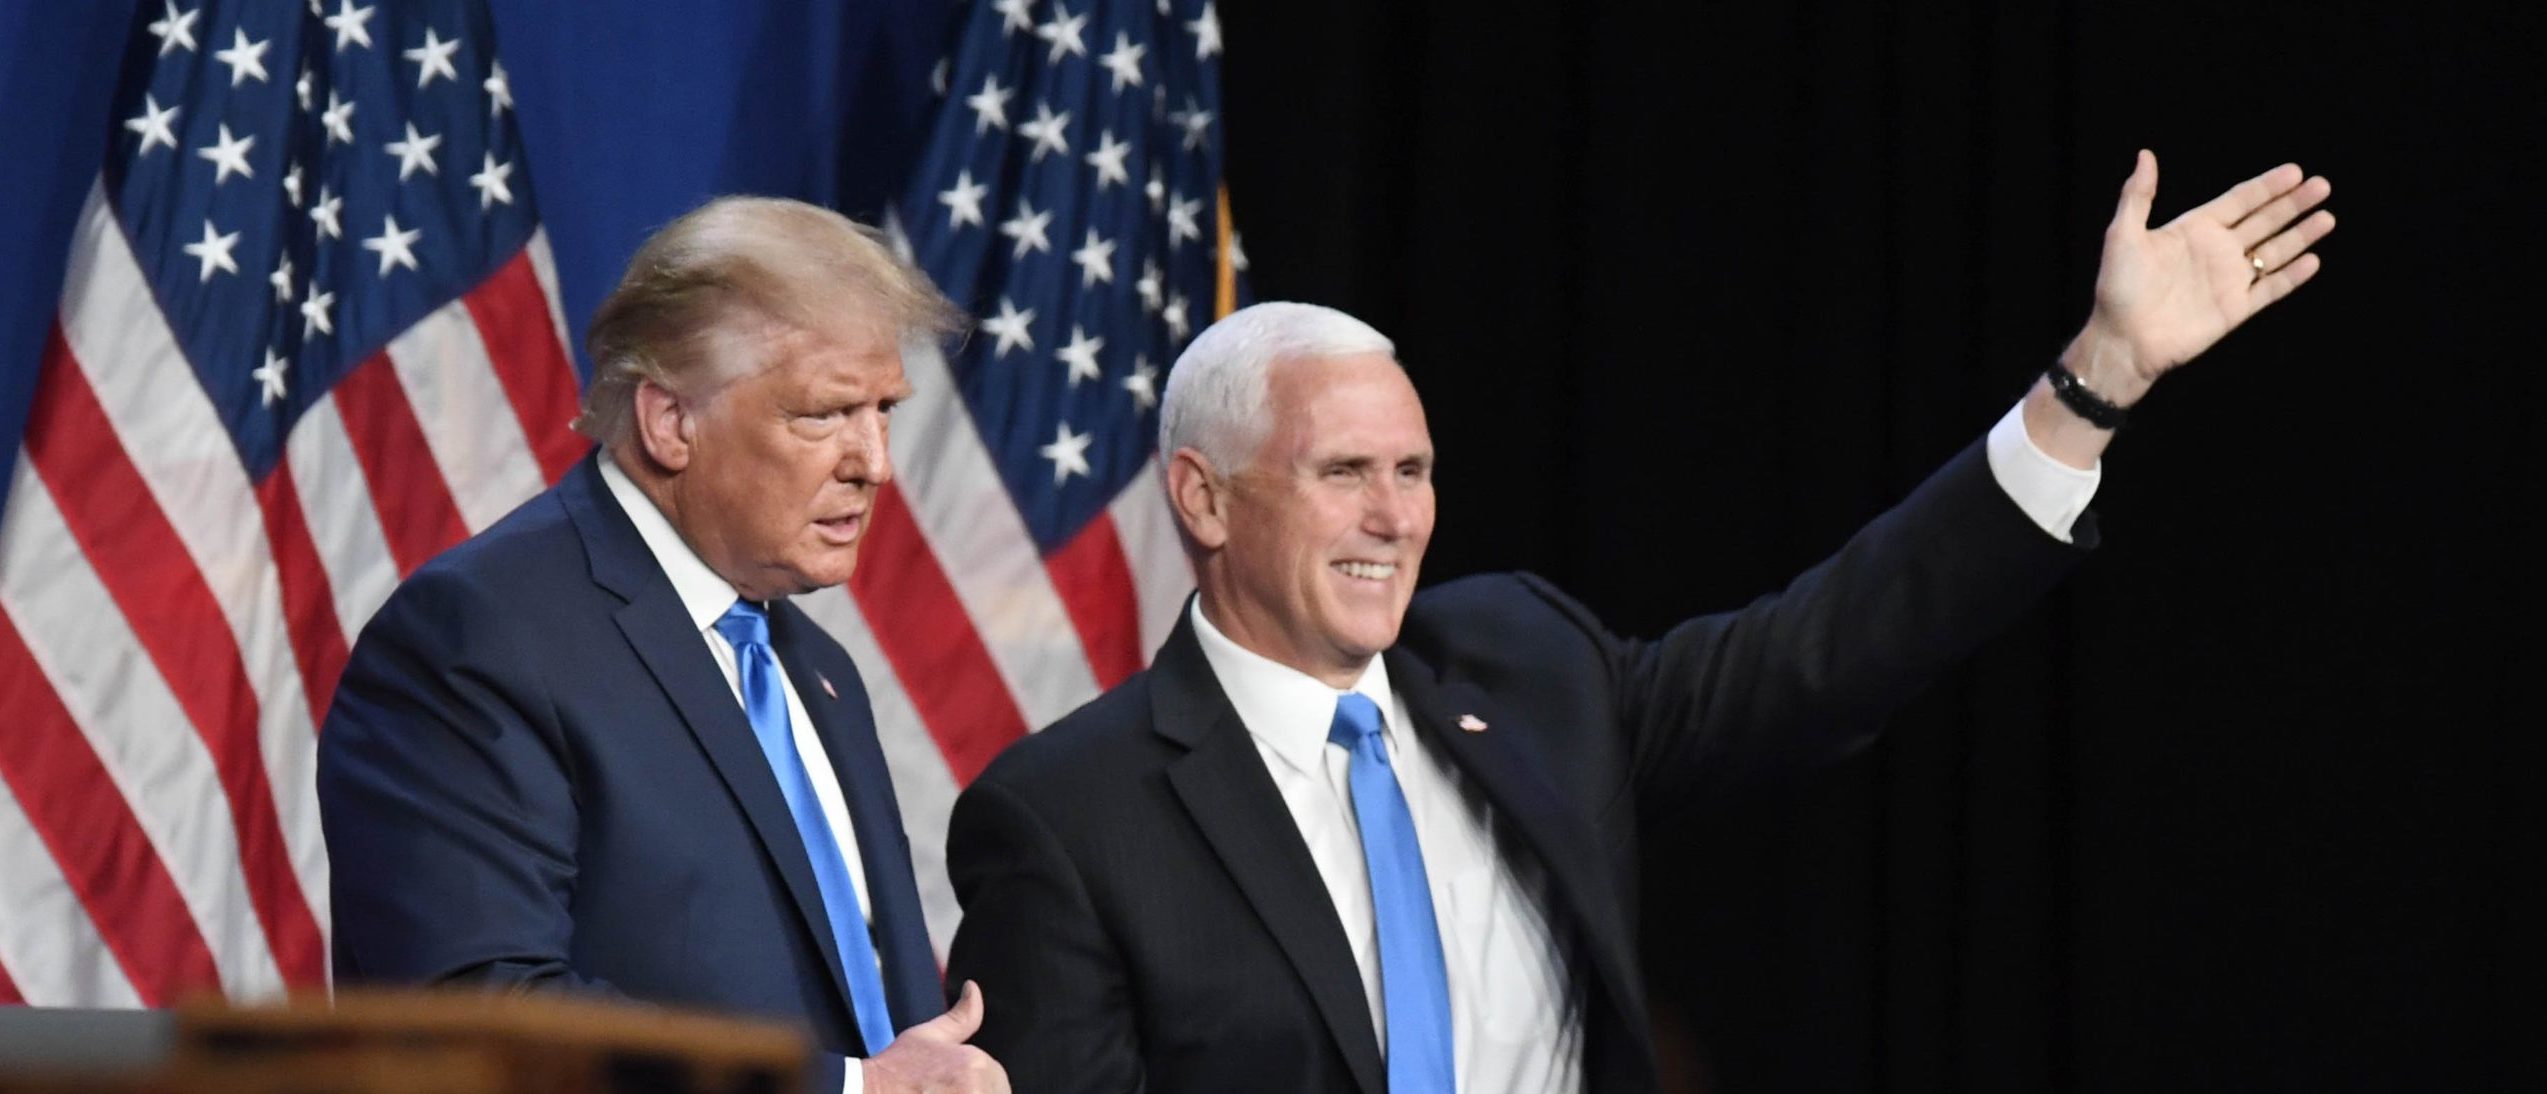 President Donald J. Trump and Vice President Mike Pence greet delegates on the first day of the Republican National Convention at the Charlotte Convention Center on August 24, 2020 in Charlotte, North Carolina. (David T. Foster III-Pool/Getty Images)